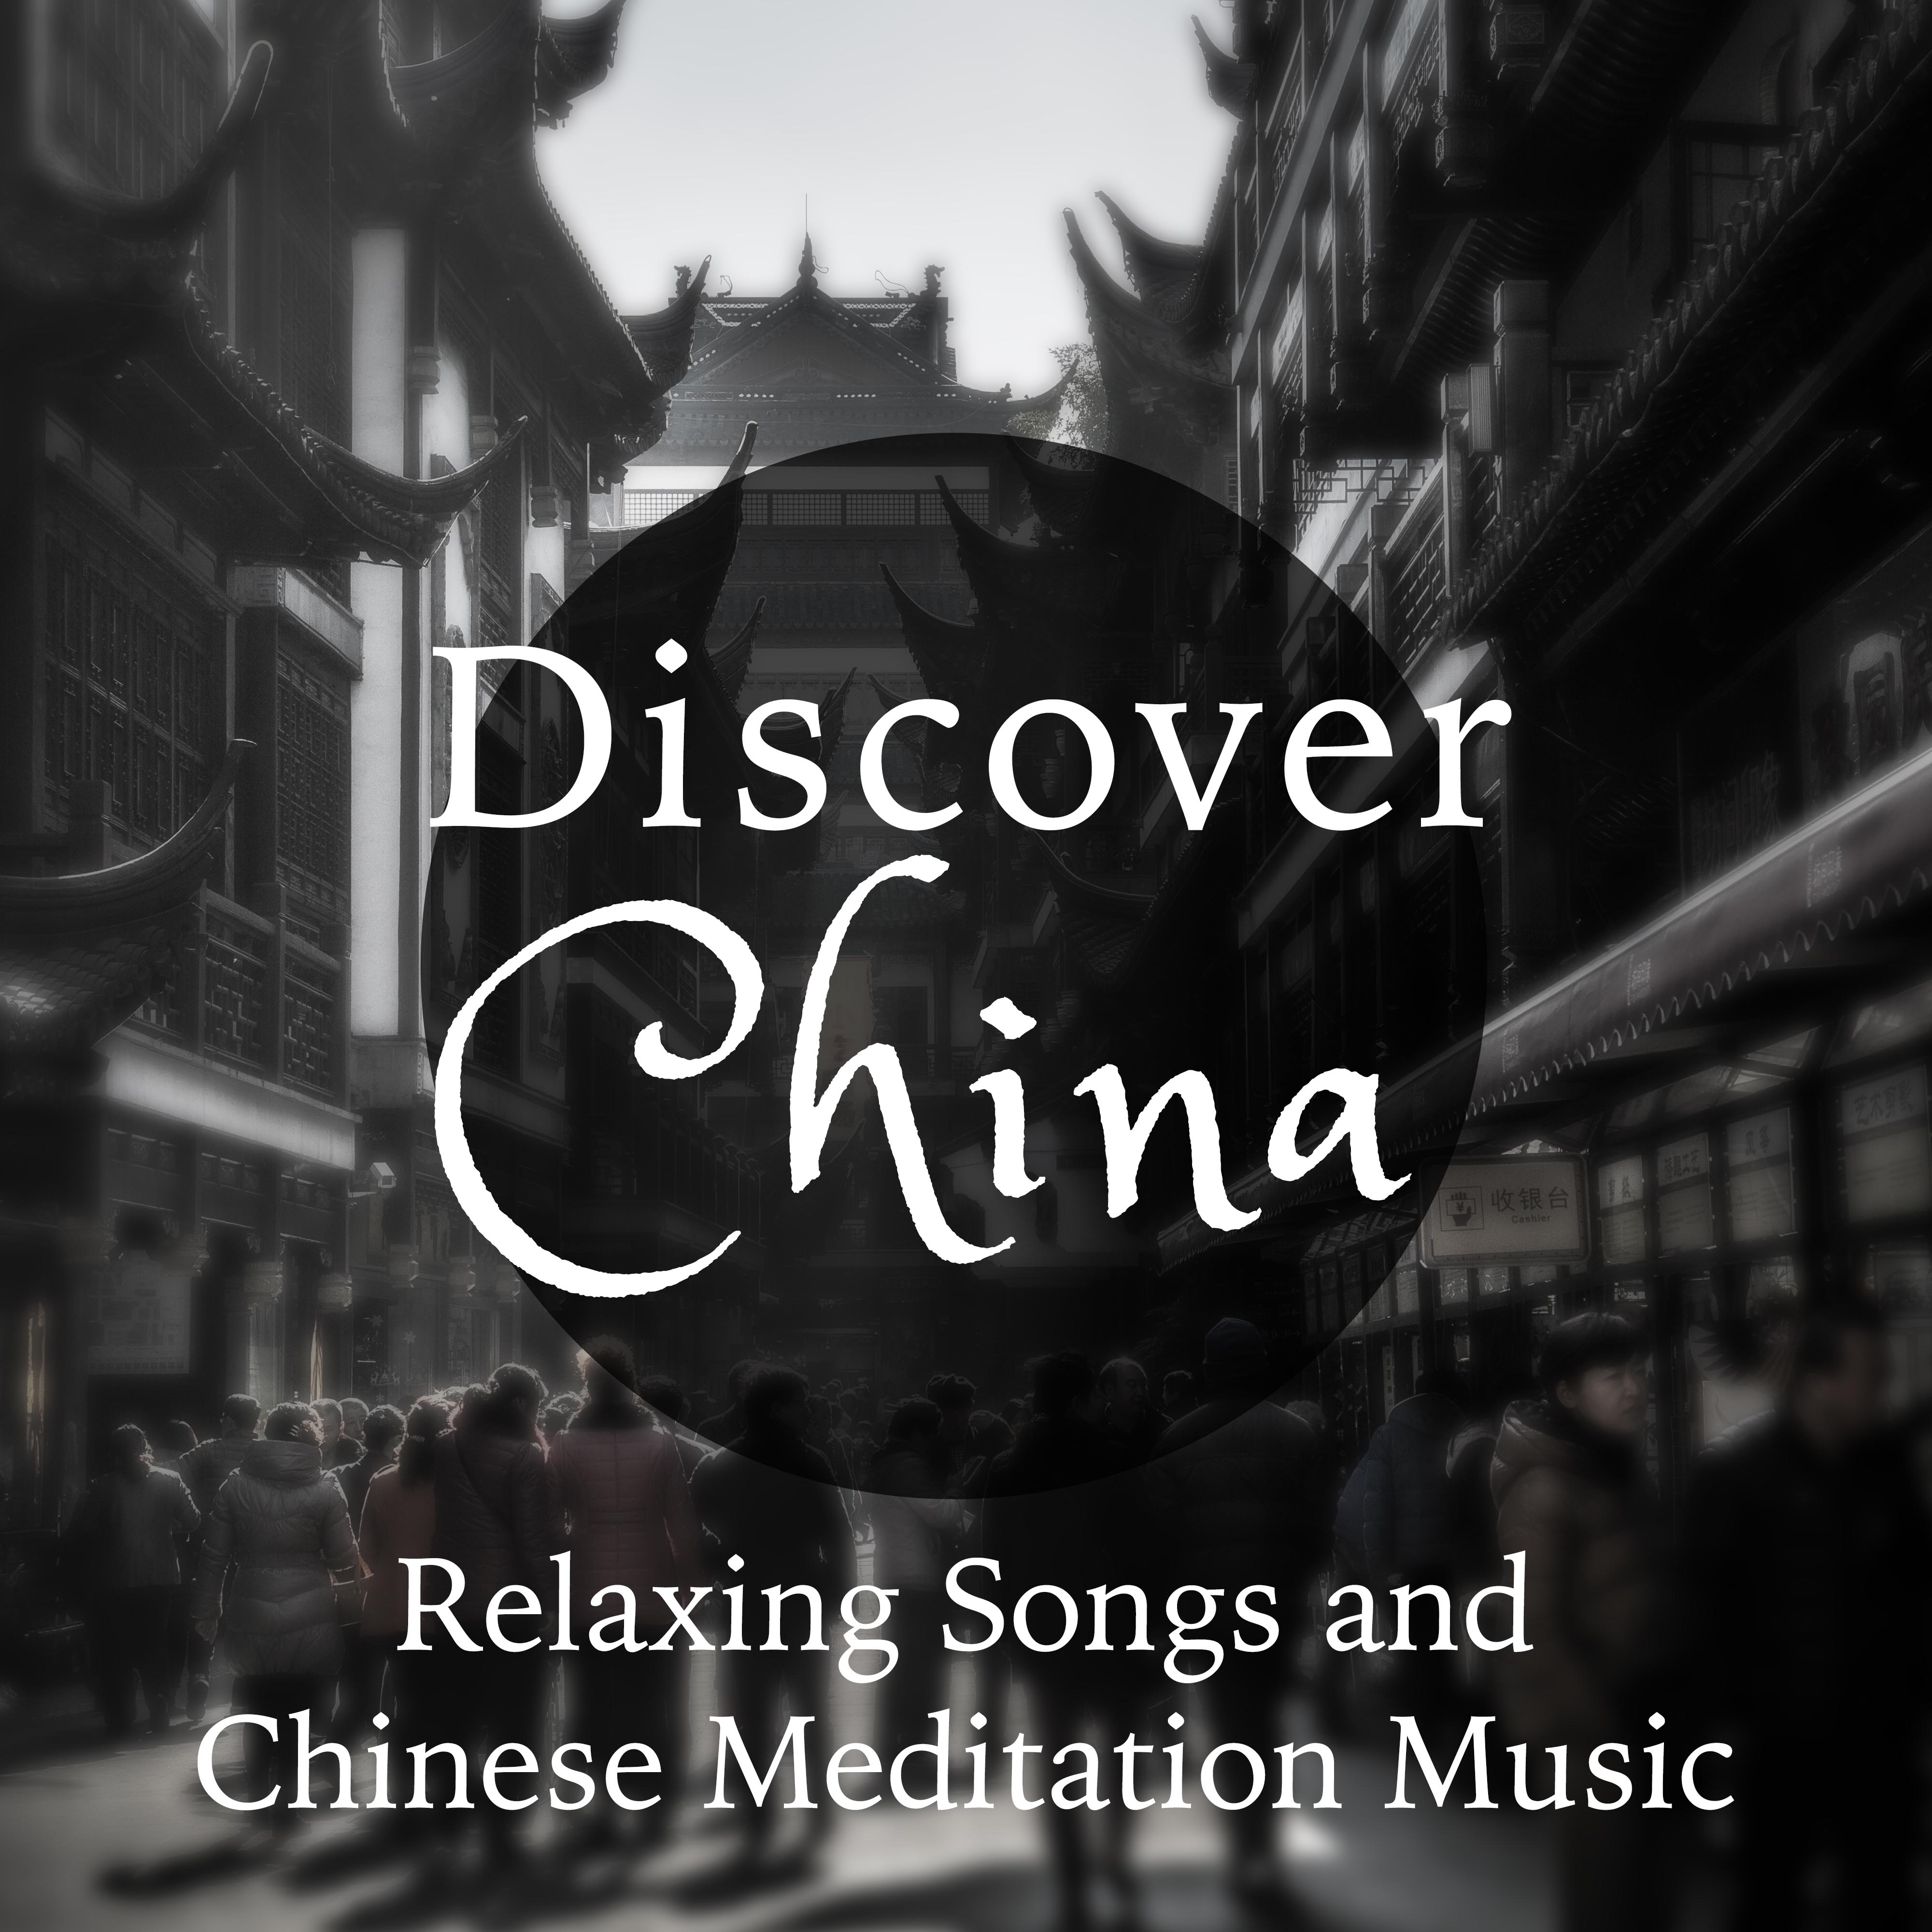 Discover China - Relaxing Songs and Chinese Meditation Music